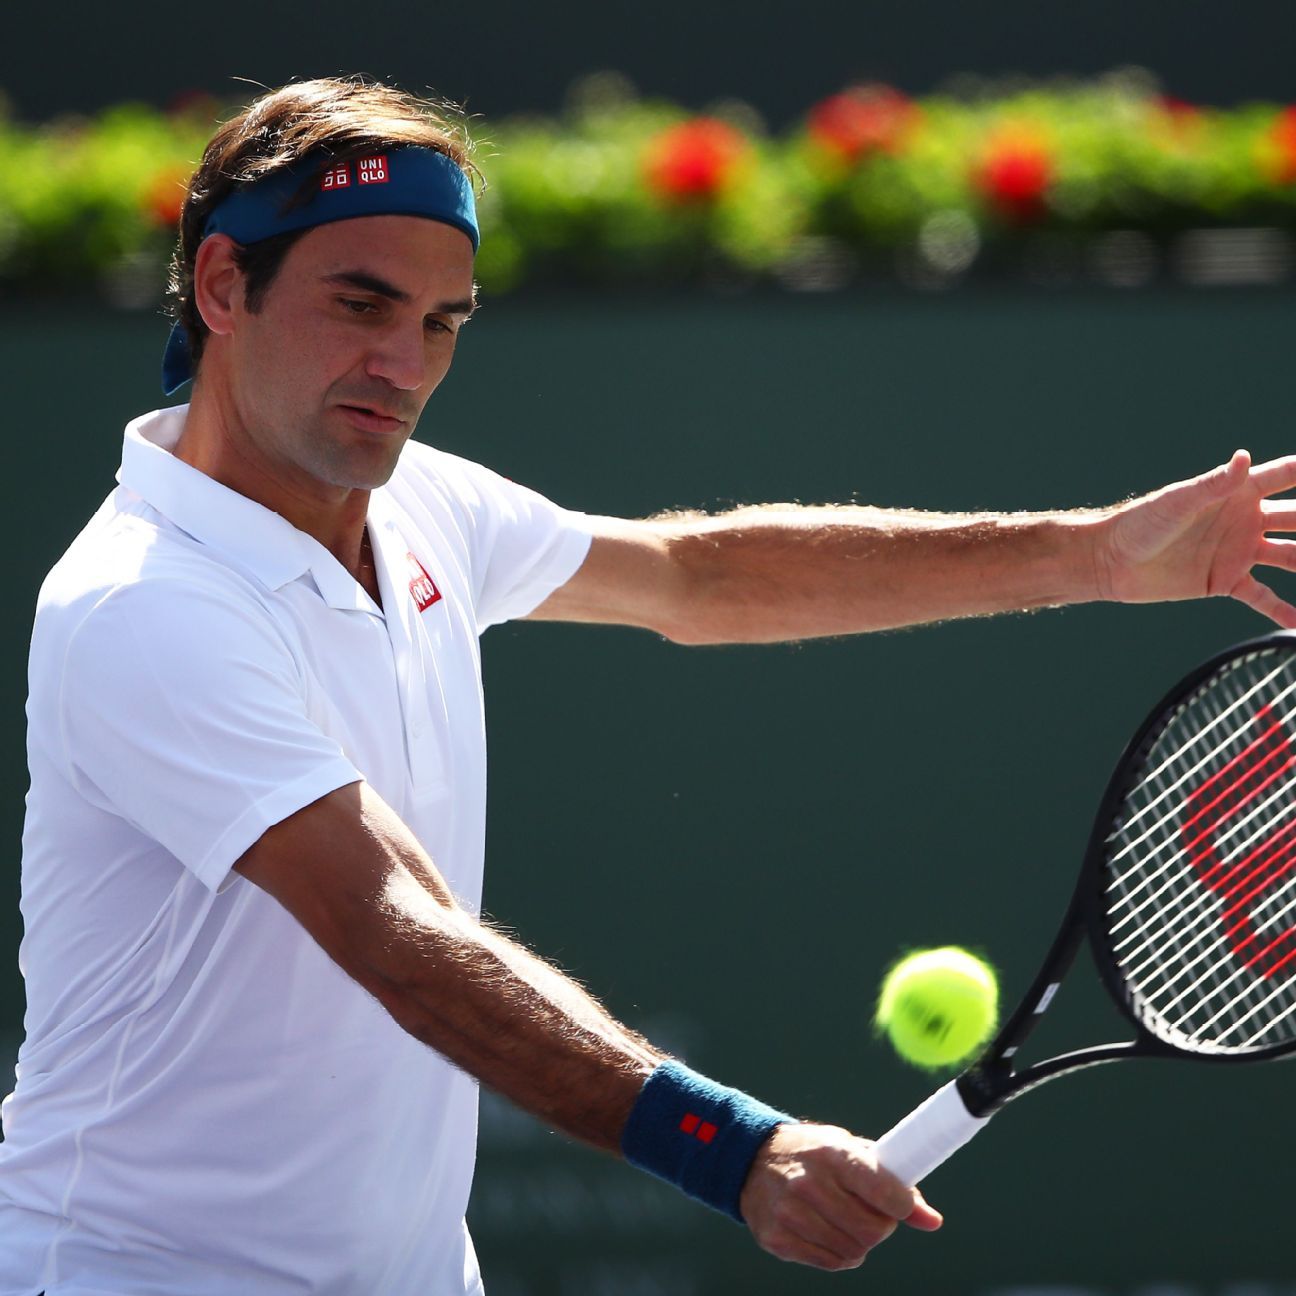 Federer, Nadal win to set up 39th career meeting